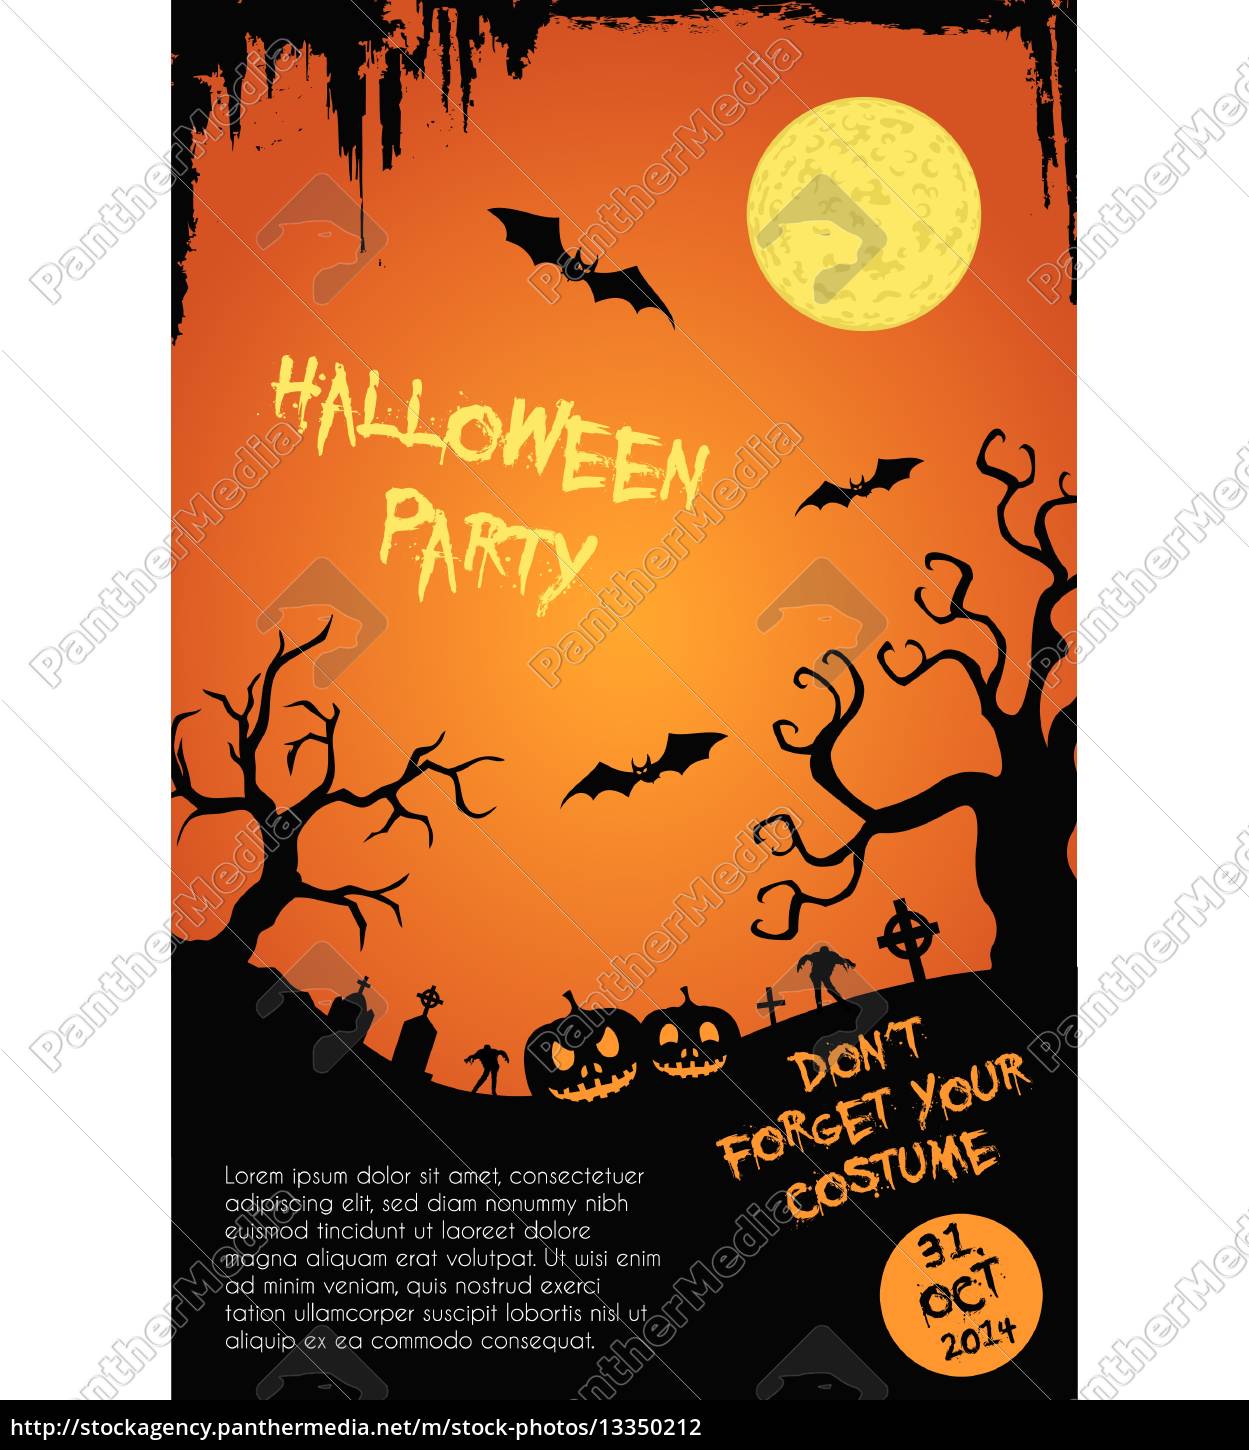 Halloween party flyer template - orange and black - Royalty free For Halloween Costume Party Flyer Templates